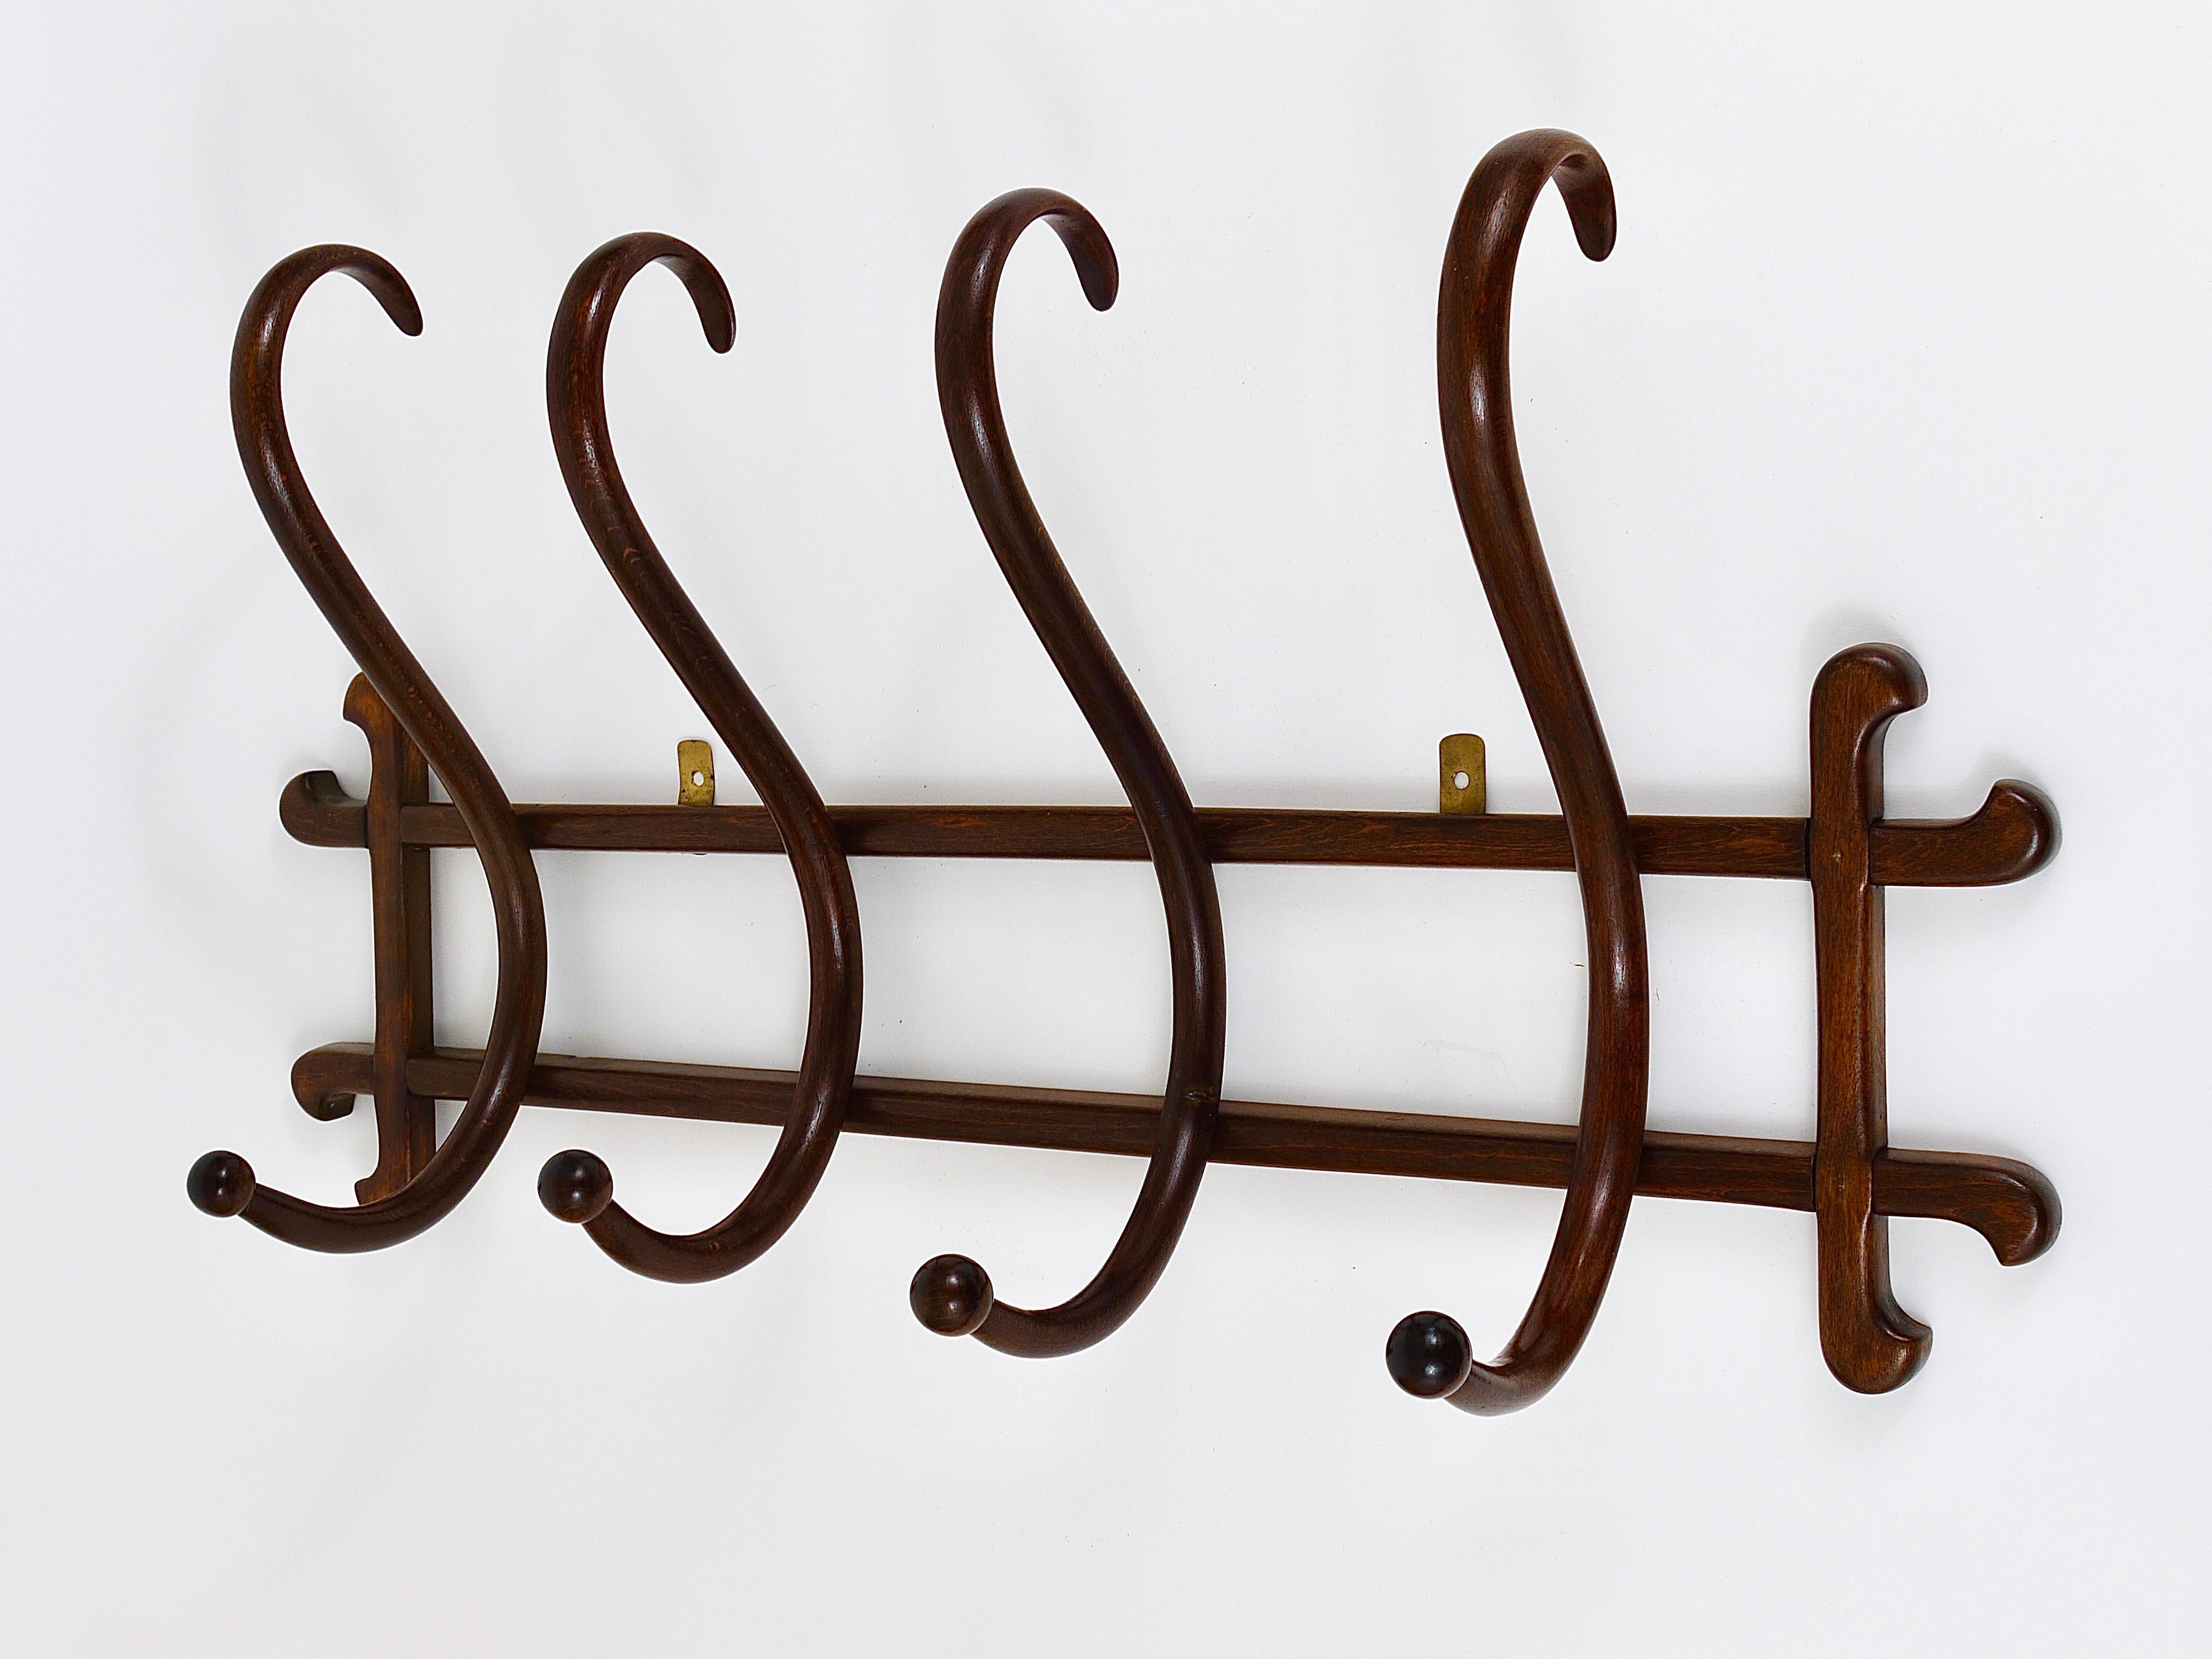 1900s Thonet Art Nouveau Secession Bentwood Wall Coat Rack with four Hangers 6